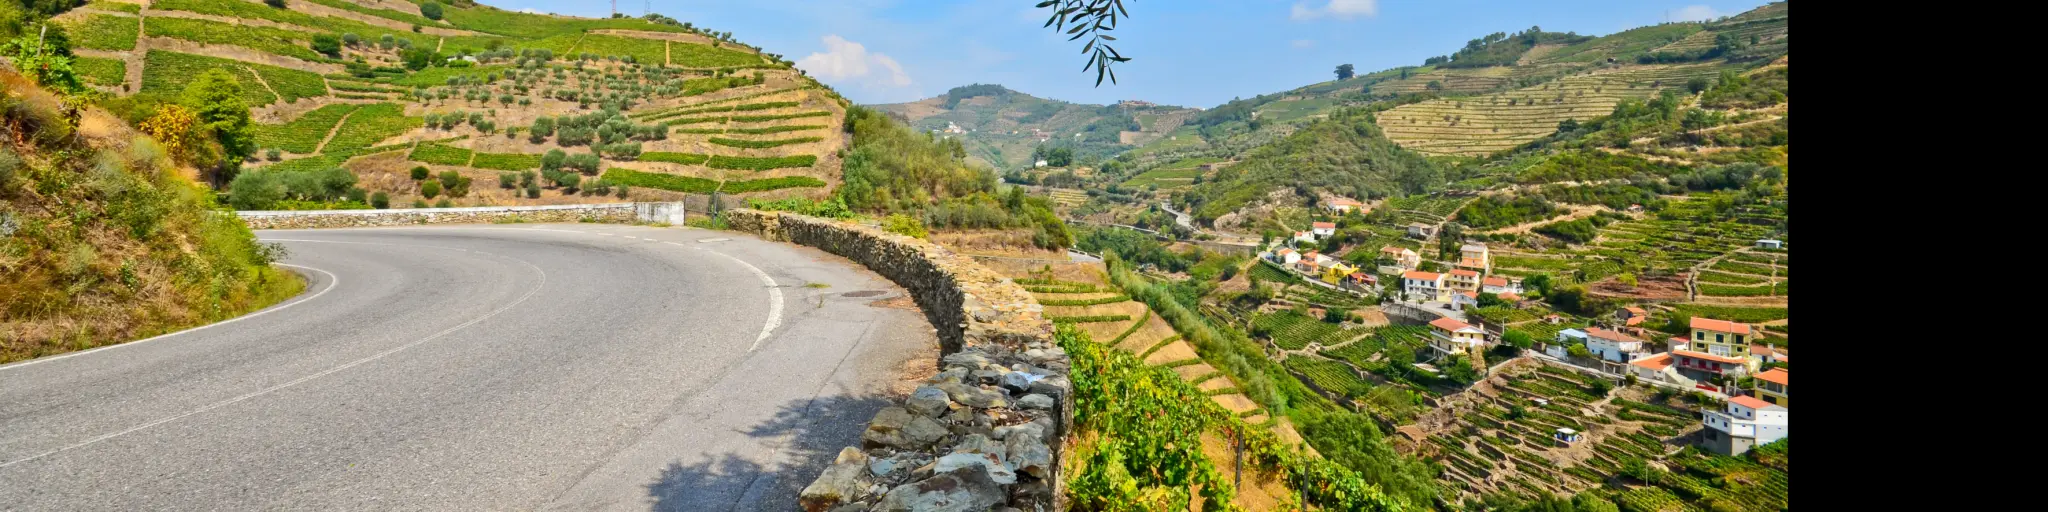 Full guide for driving in Portugal with tips, road knowledge and speed limits